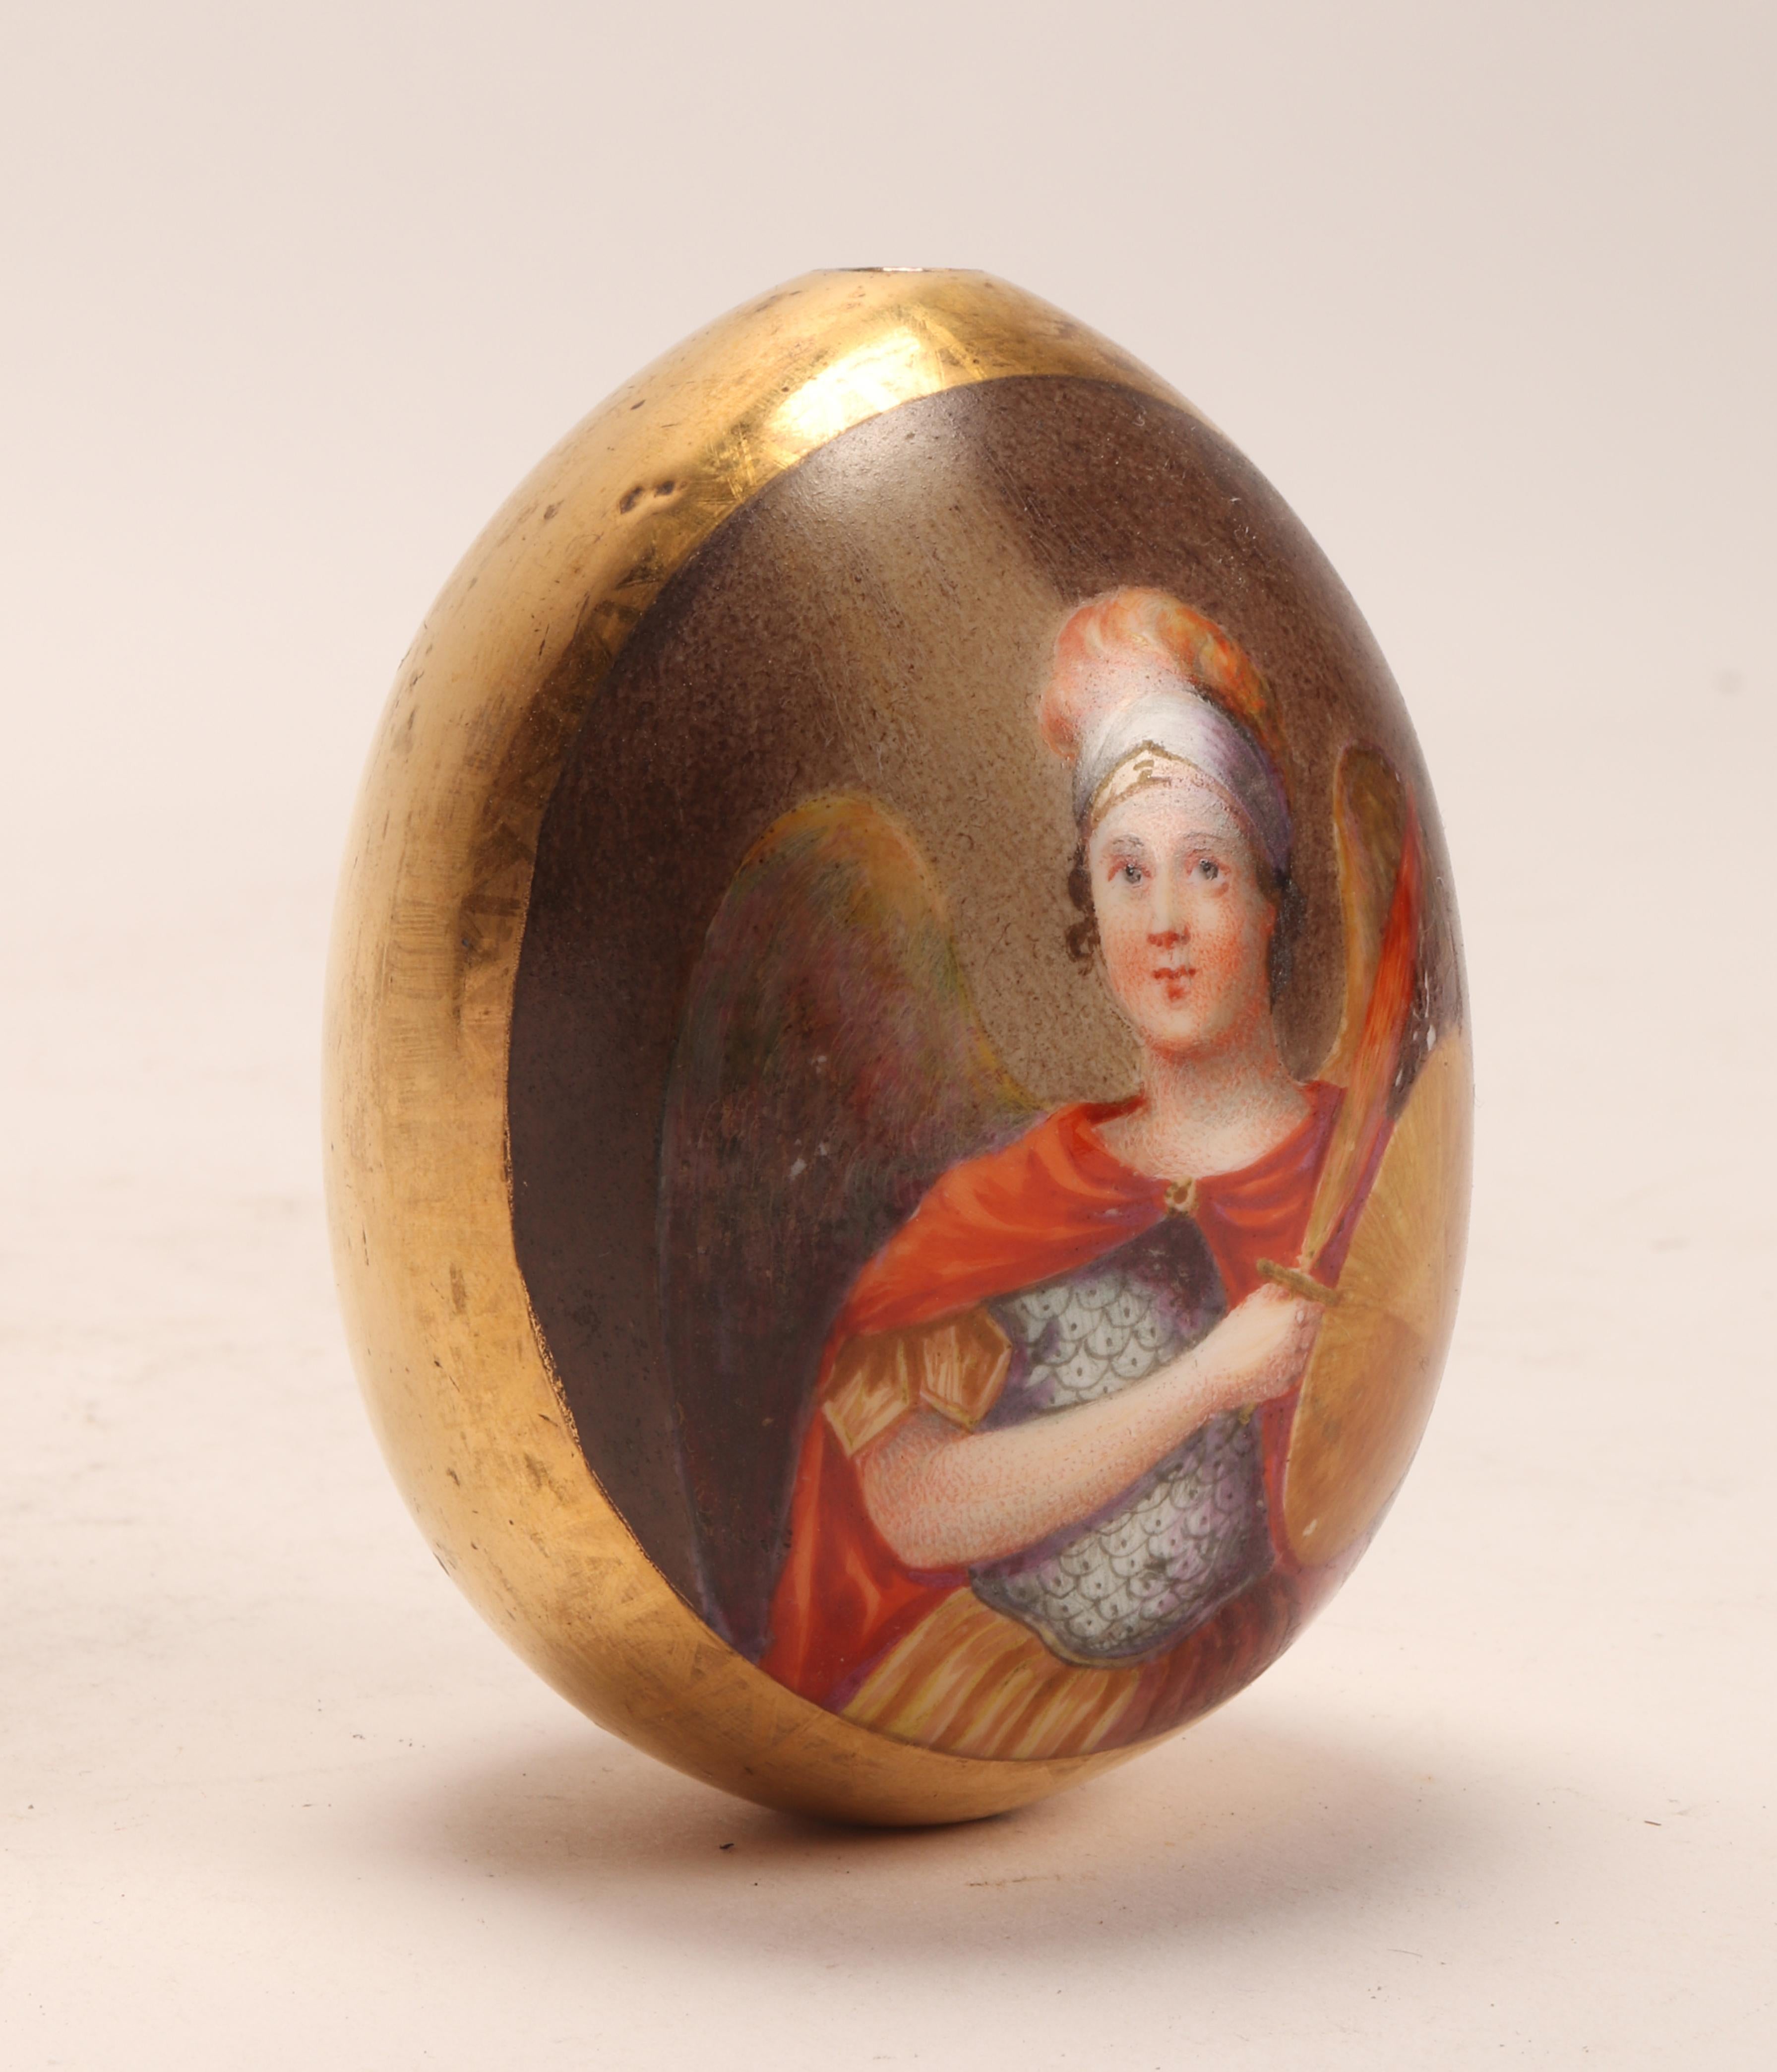 A painted porcelain Easter egg, depicting the icon with the Archangel Michael, on one side, while on the other side the cyrillic monogram: C.R. (Risen Christ), on a golden background. saint Petersburg, Russia, circa 1880.